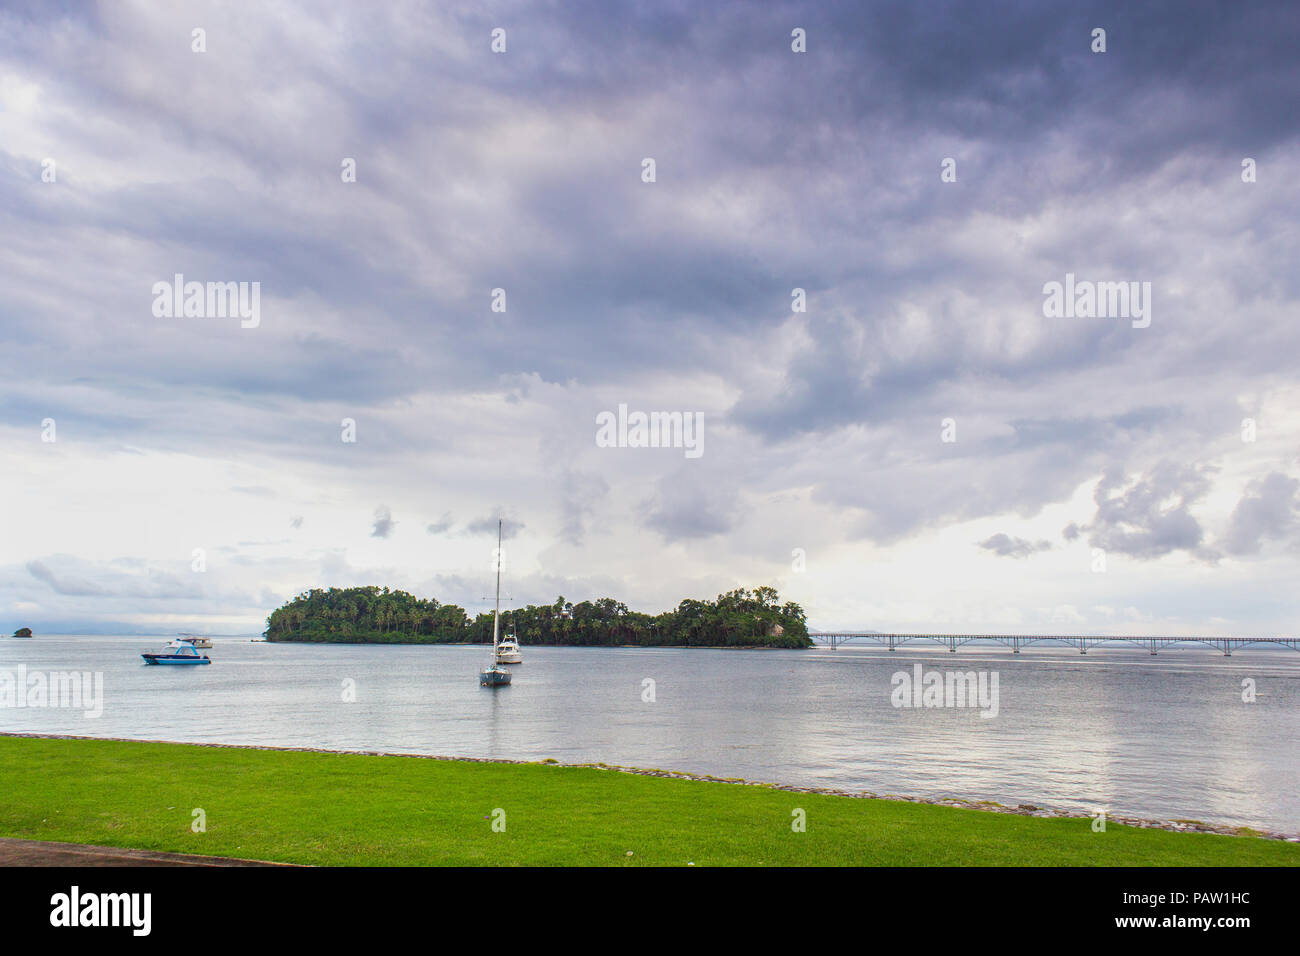 sail boats near the cost with palm trees in cloudy weather. Samana, Dominican Republic Stock Photo